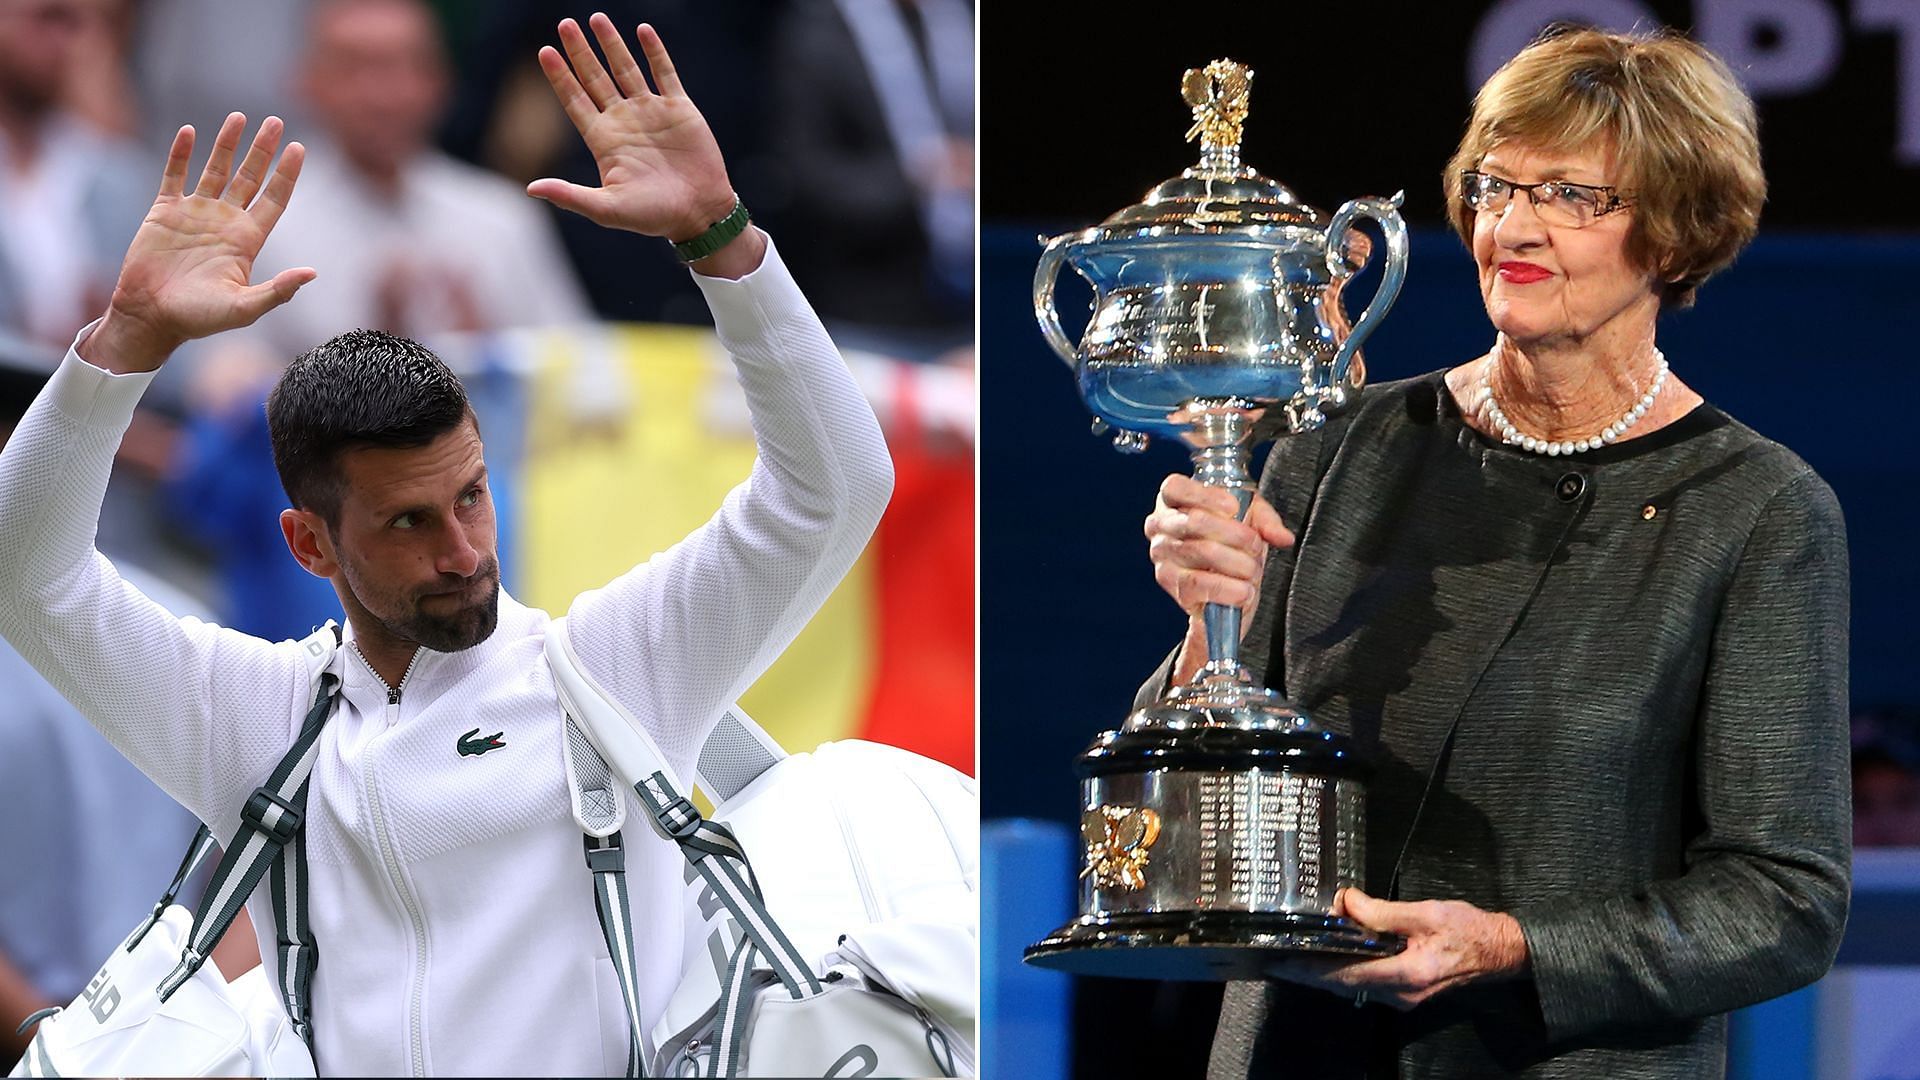 If Novak Djokovic cannot, can anyone ever beat Margaret Court's all-time 24 Grand Slam record?